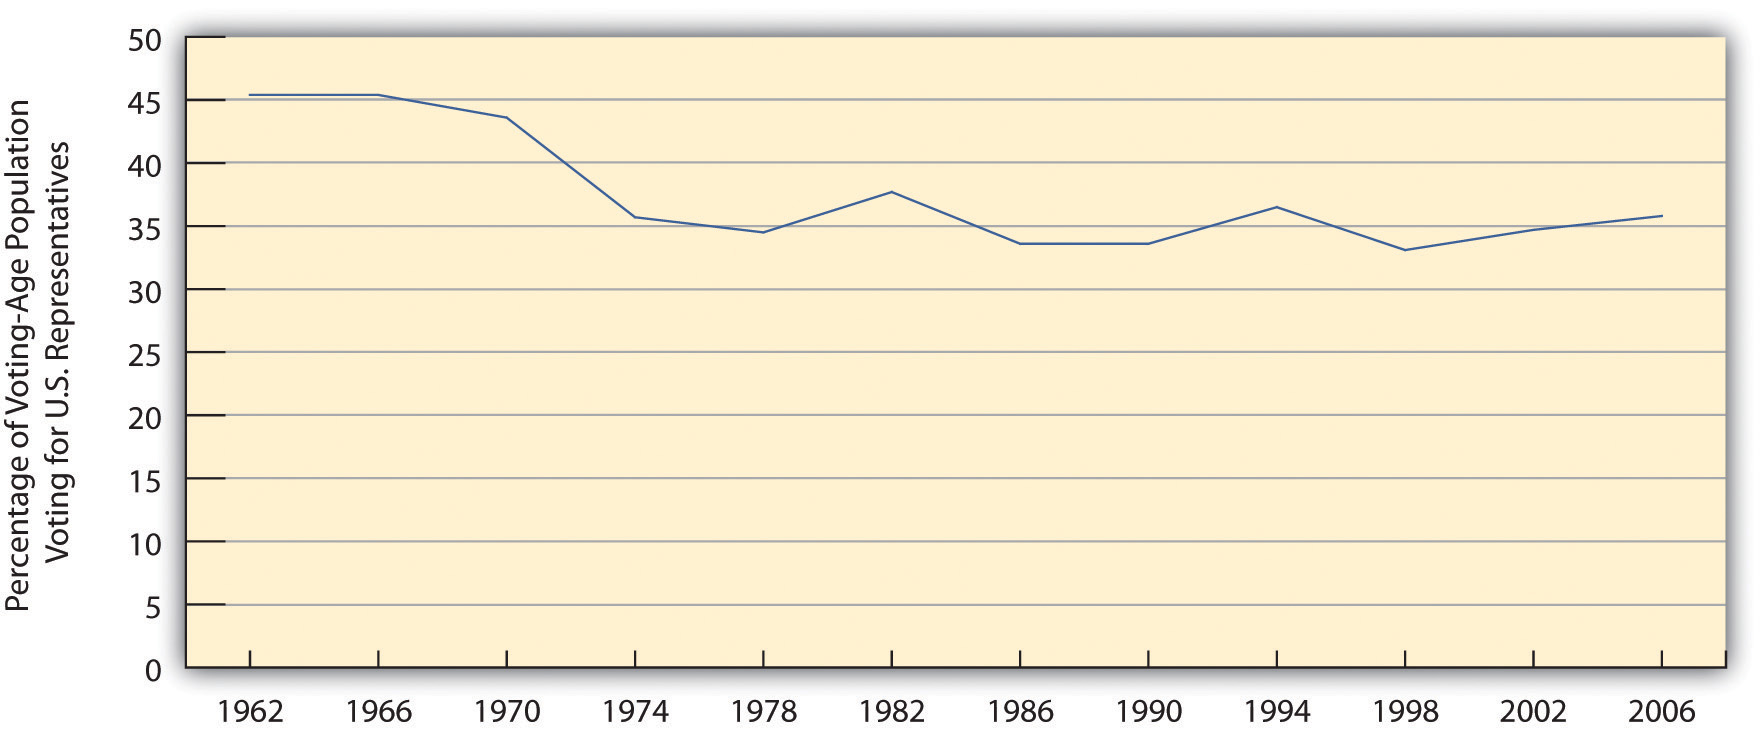 Trends in Voter Turnout in Nonpresidential Election Years